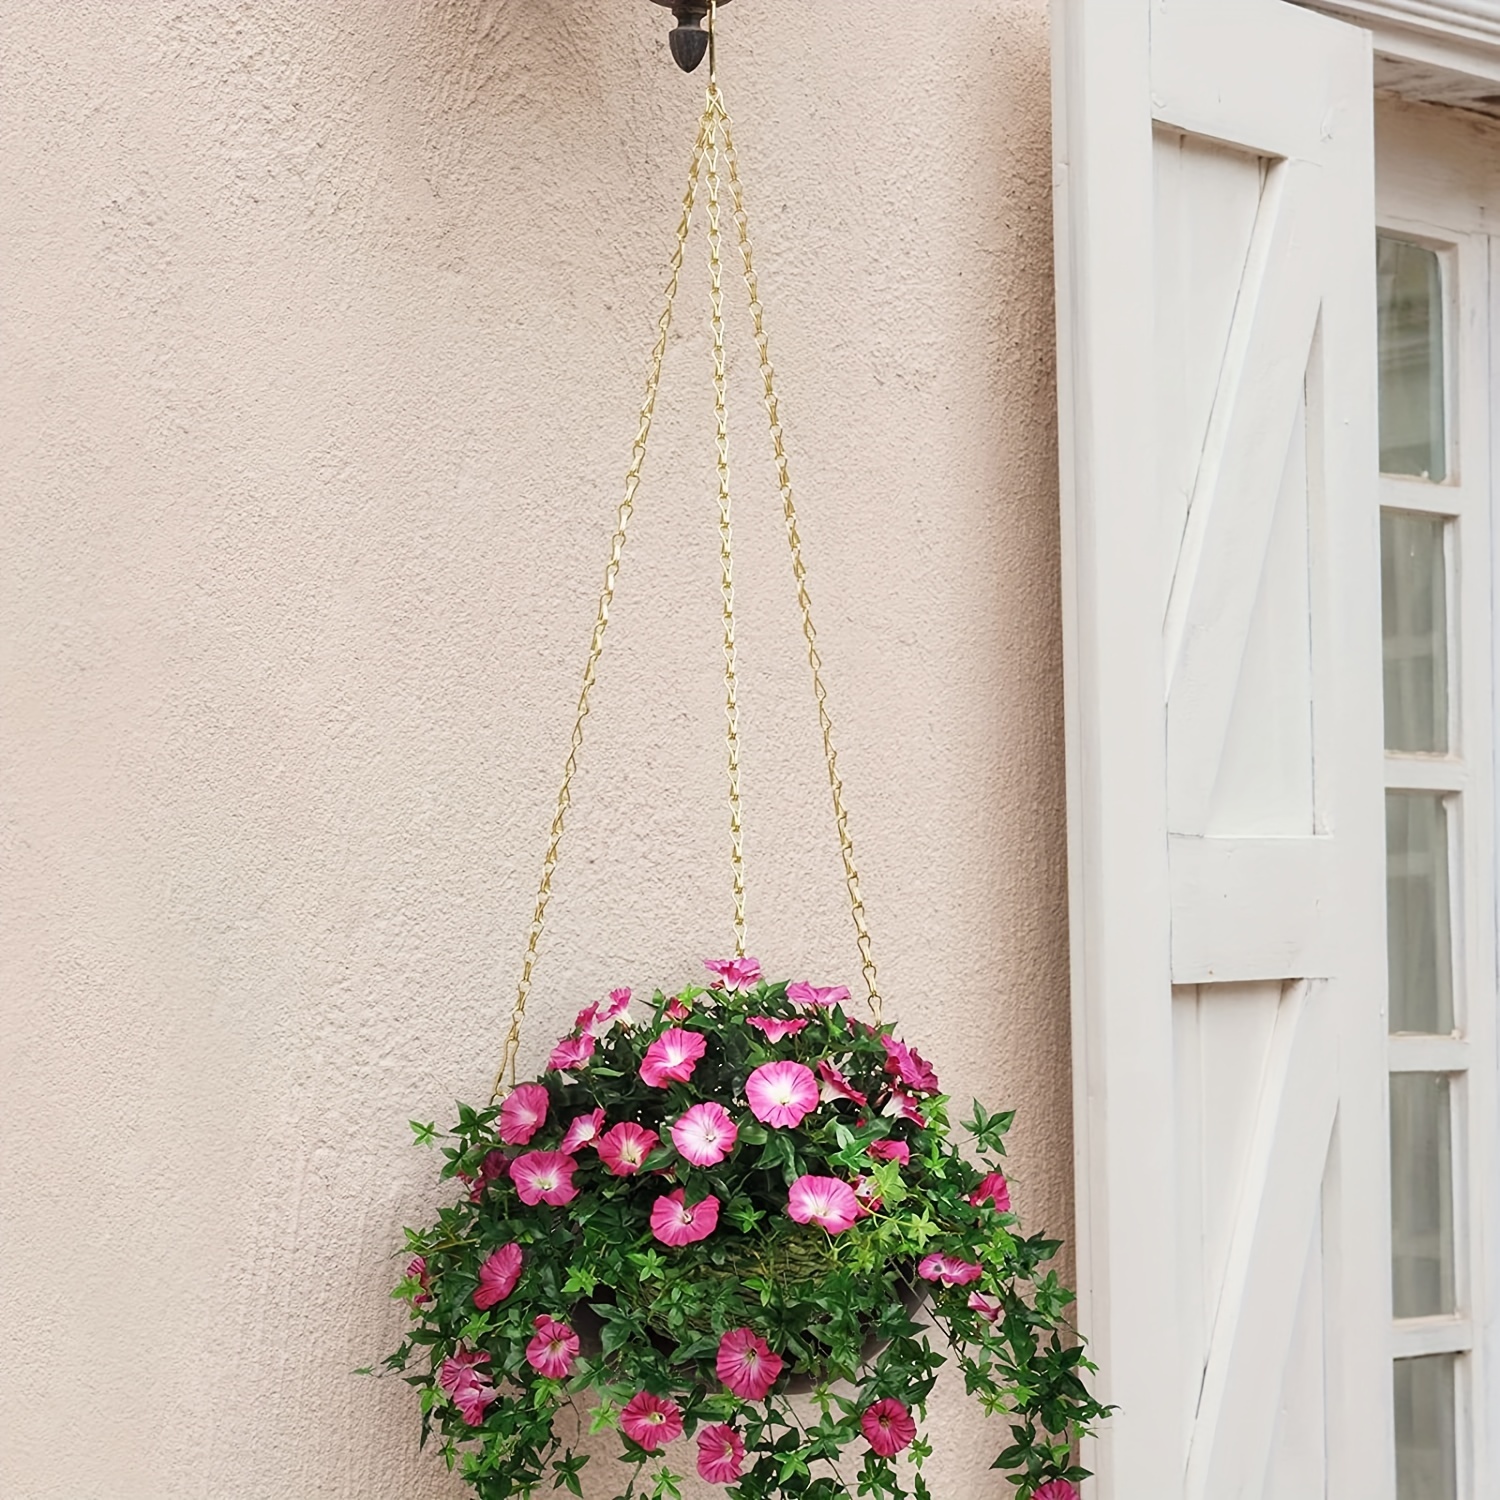 6pcs 20inches Hanging Chain for Hanging Basket Chain, Bird Feeders, Plants, Lanterns, Chain with Hooks Strong Houses, Billboards, Chalkboards, Wind